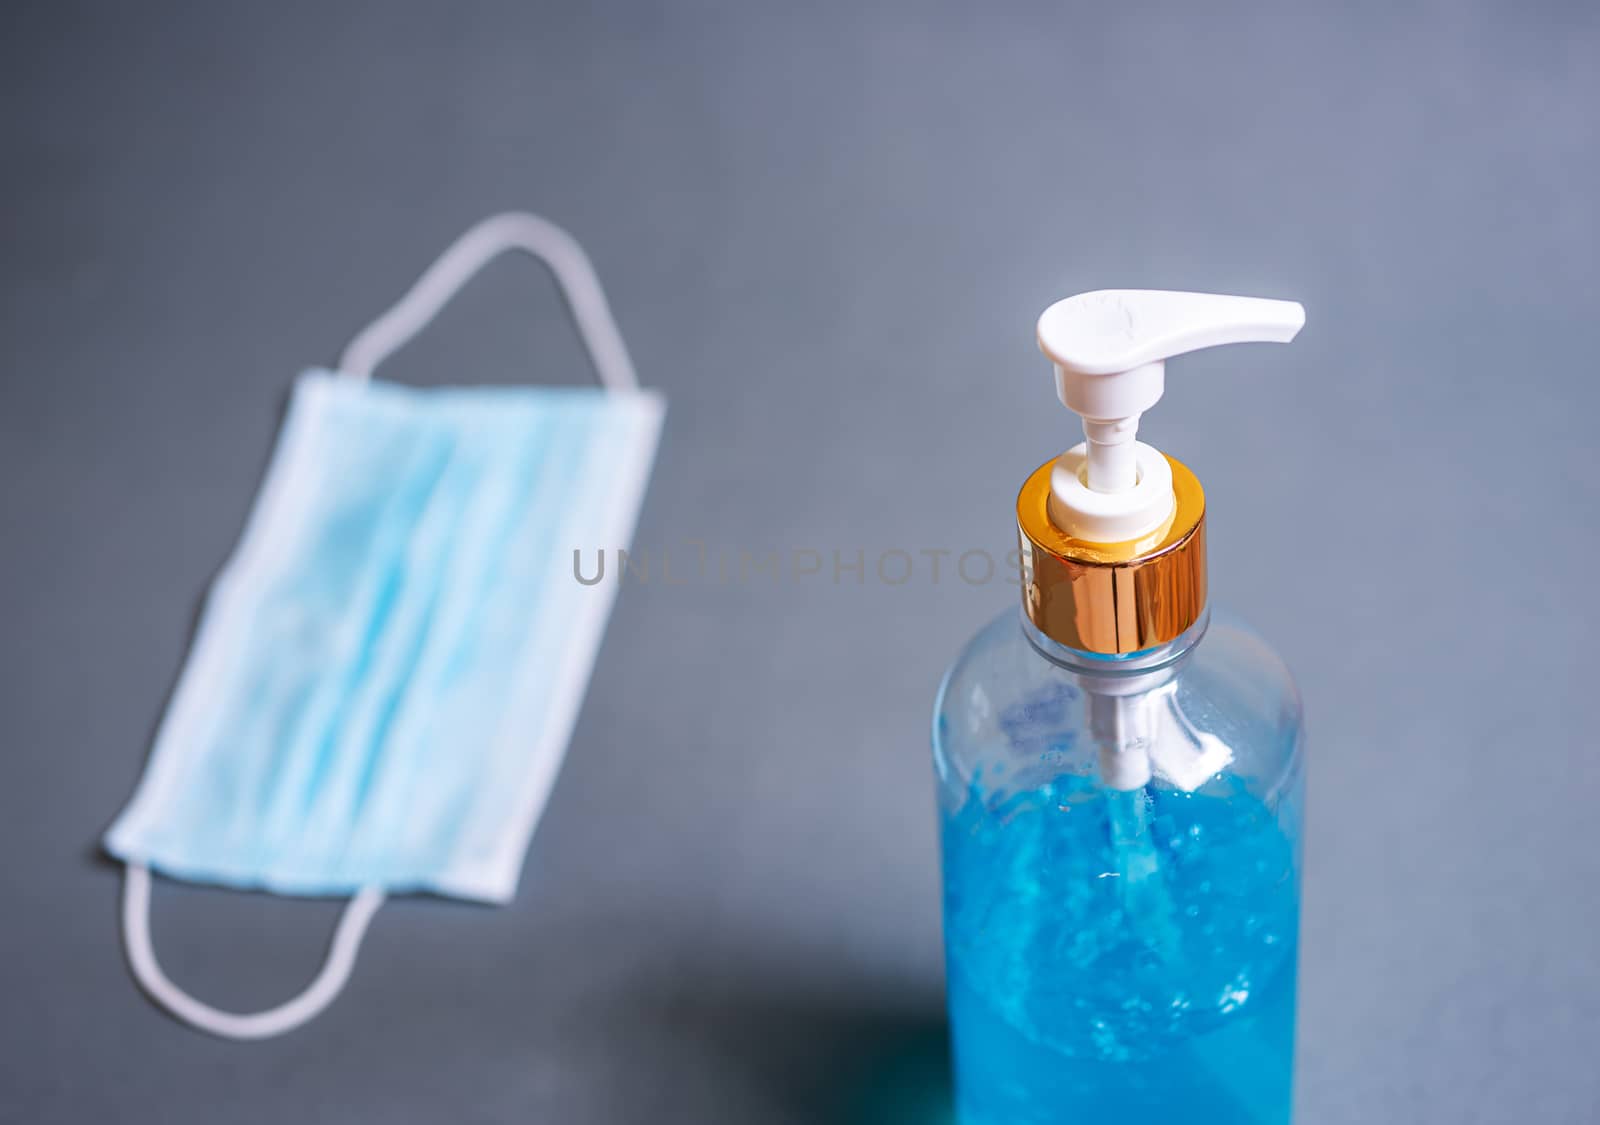 Alcohol gel with mask on blurred grey background, Corona virus or covid-19 concept